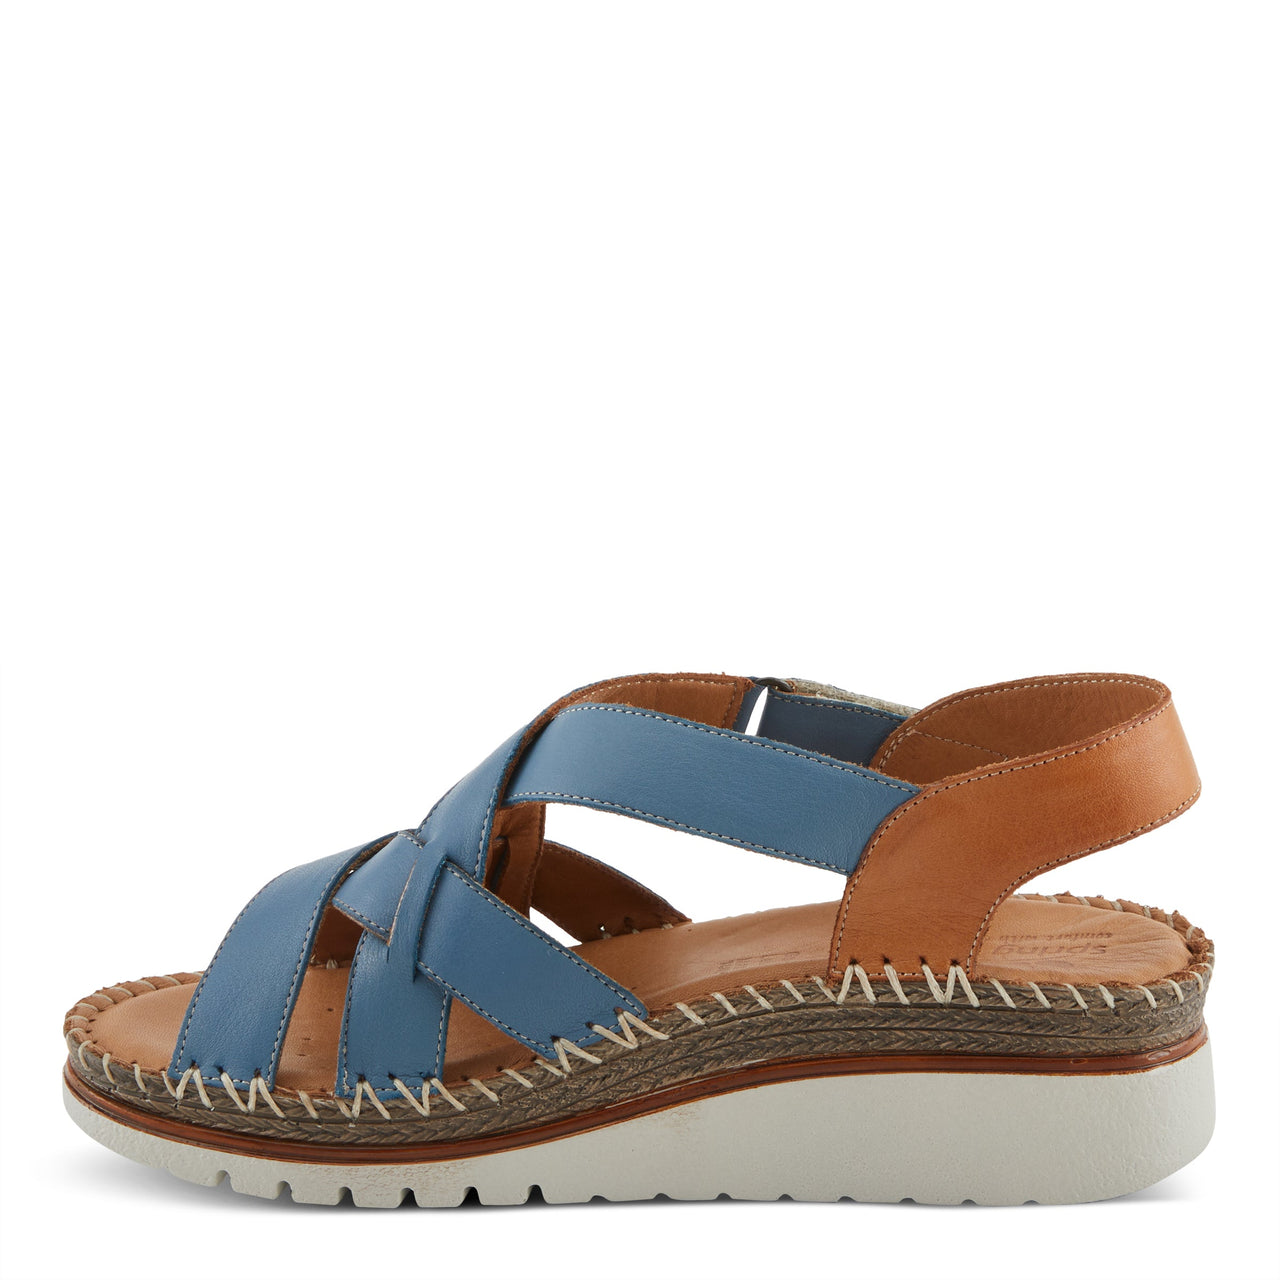 Spring Step Migula Sandals featuring black leather straps and cushioned insoles